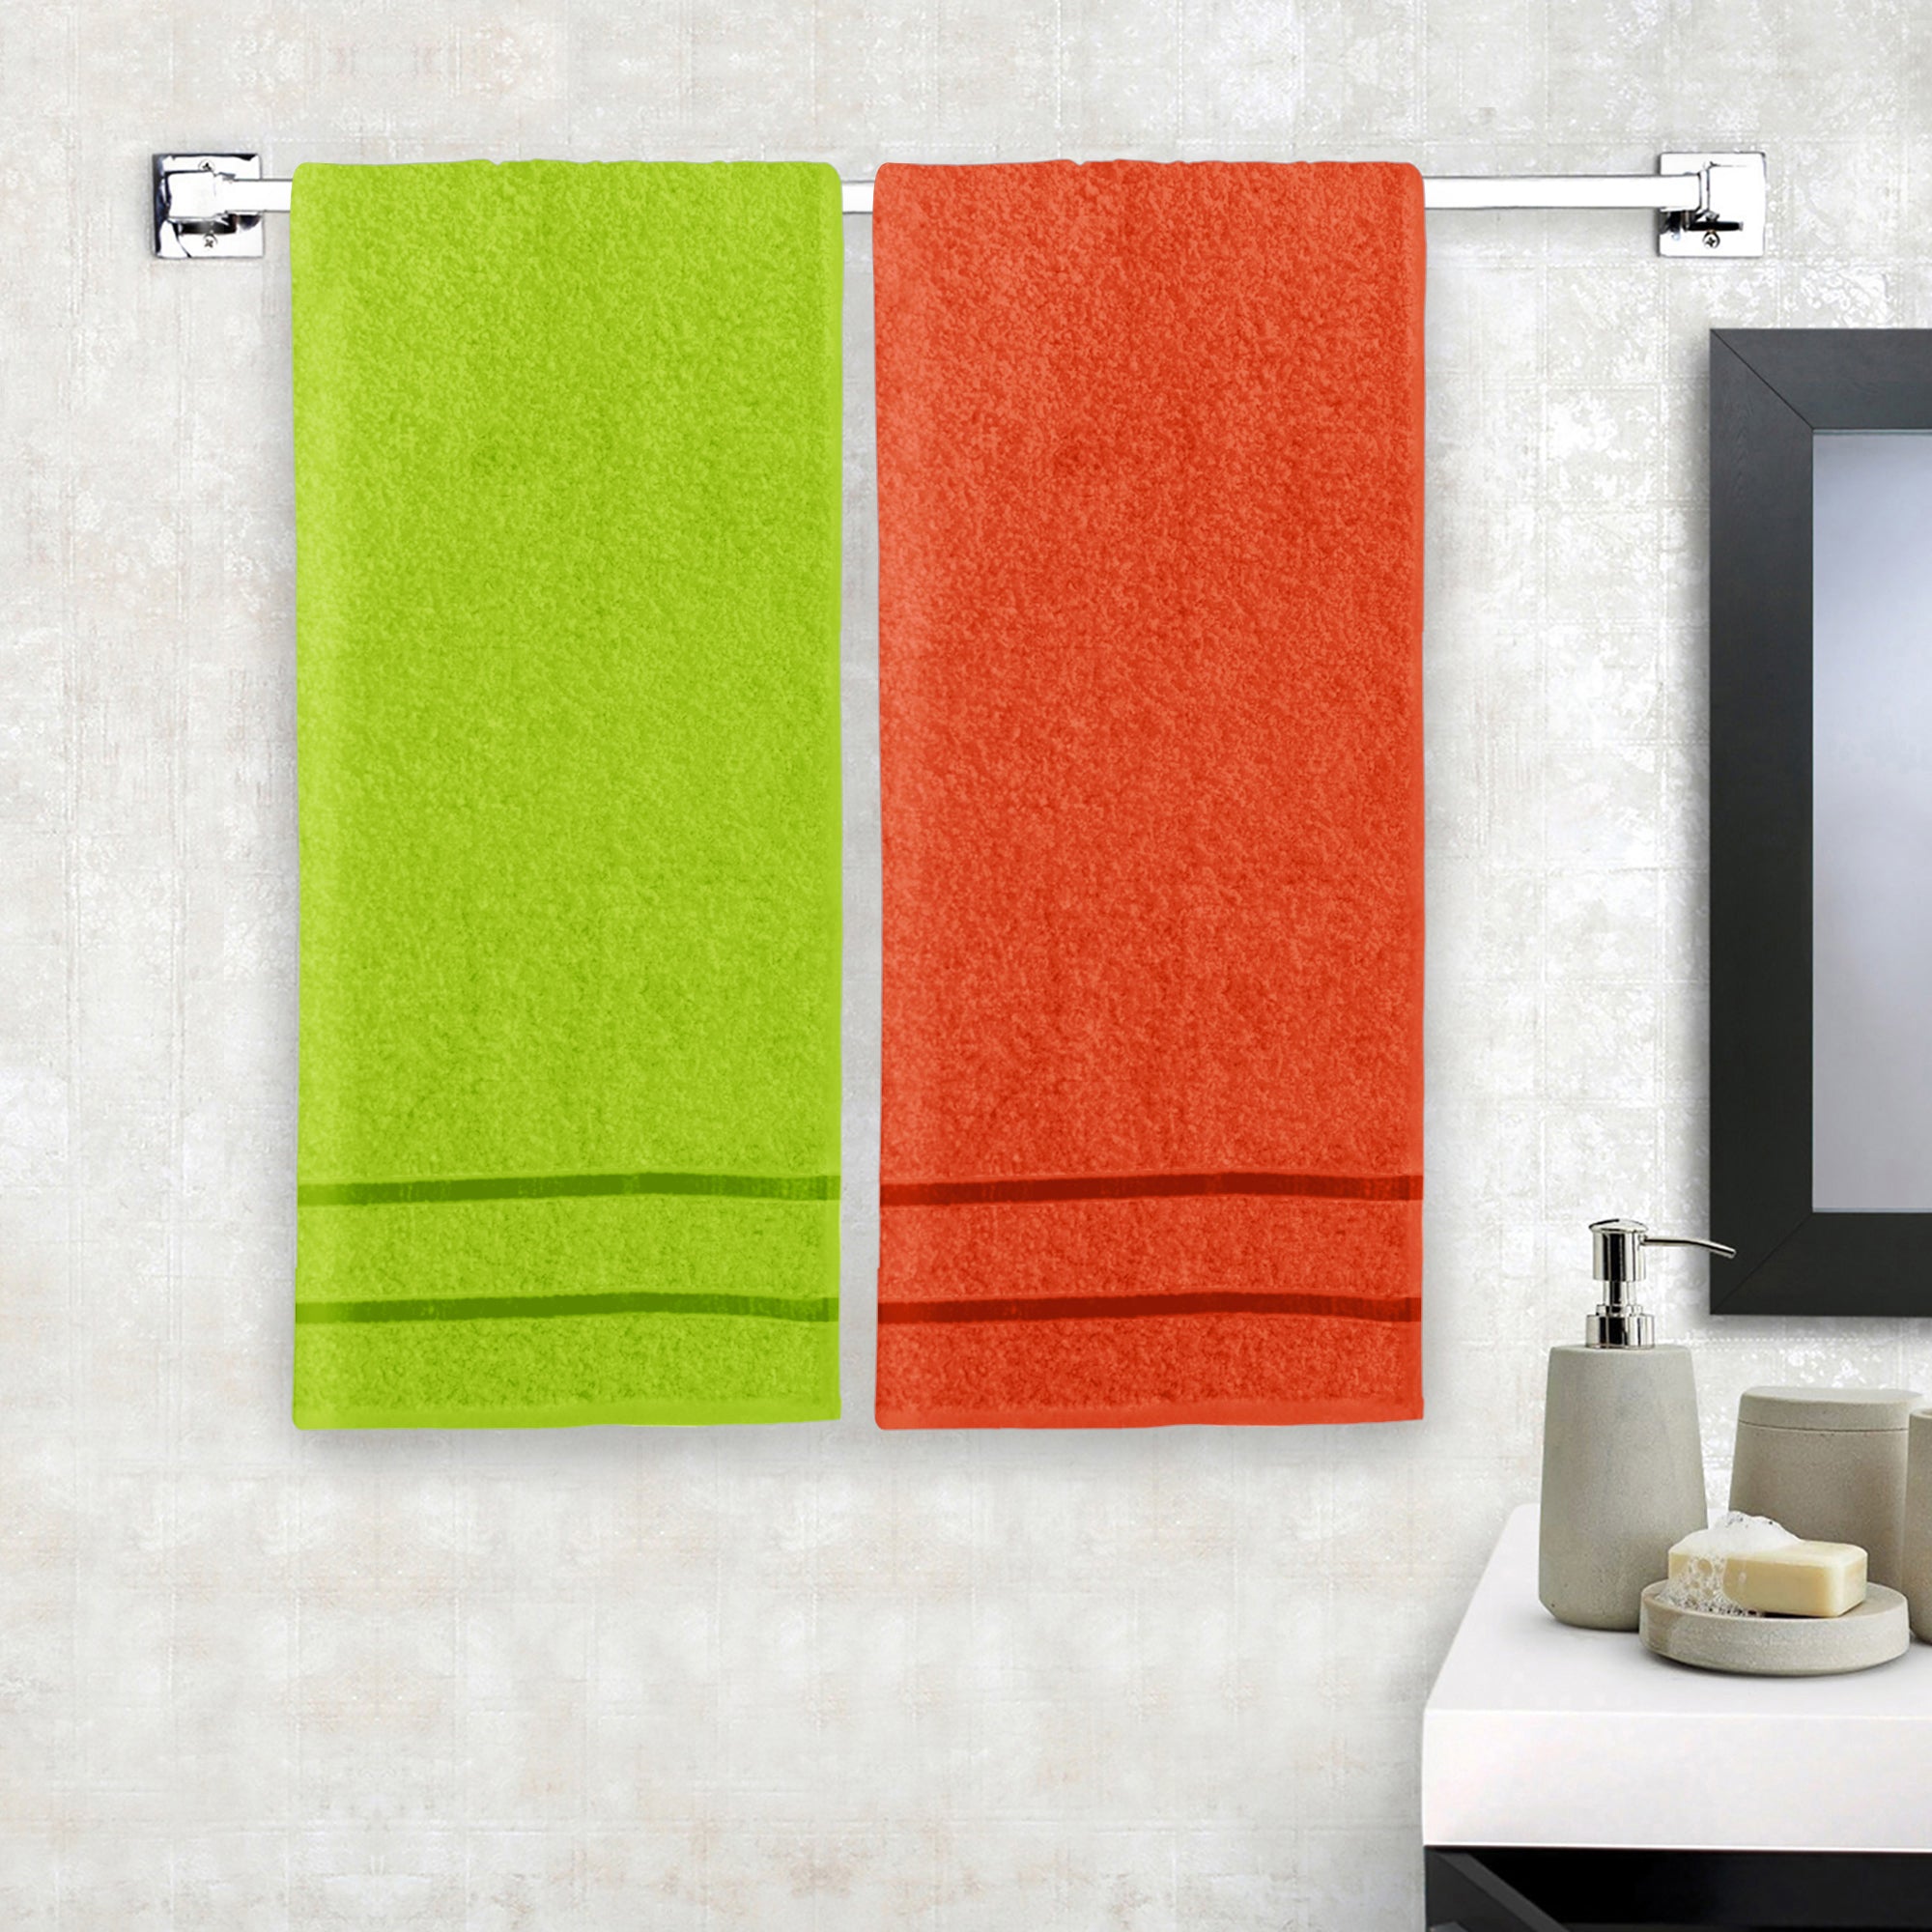 Story@Home 2 Units 100% Cotton Ladies Bath Towels - Green and Orange